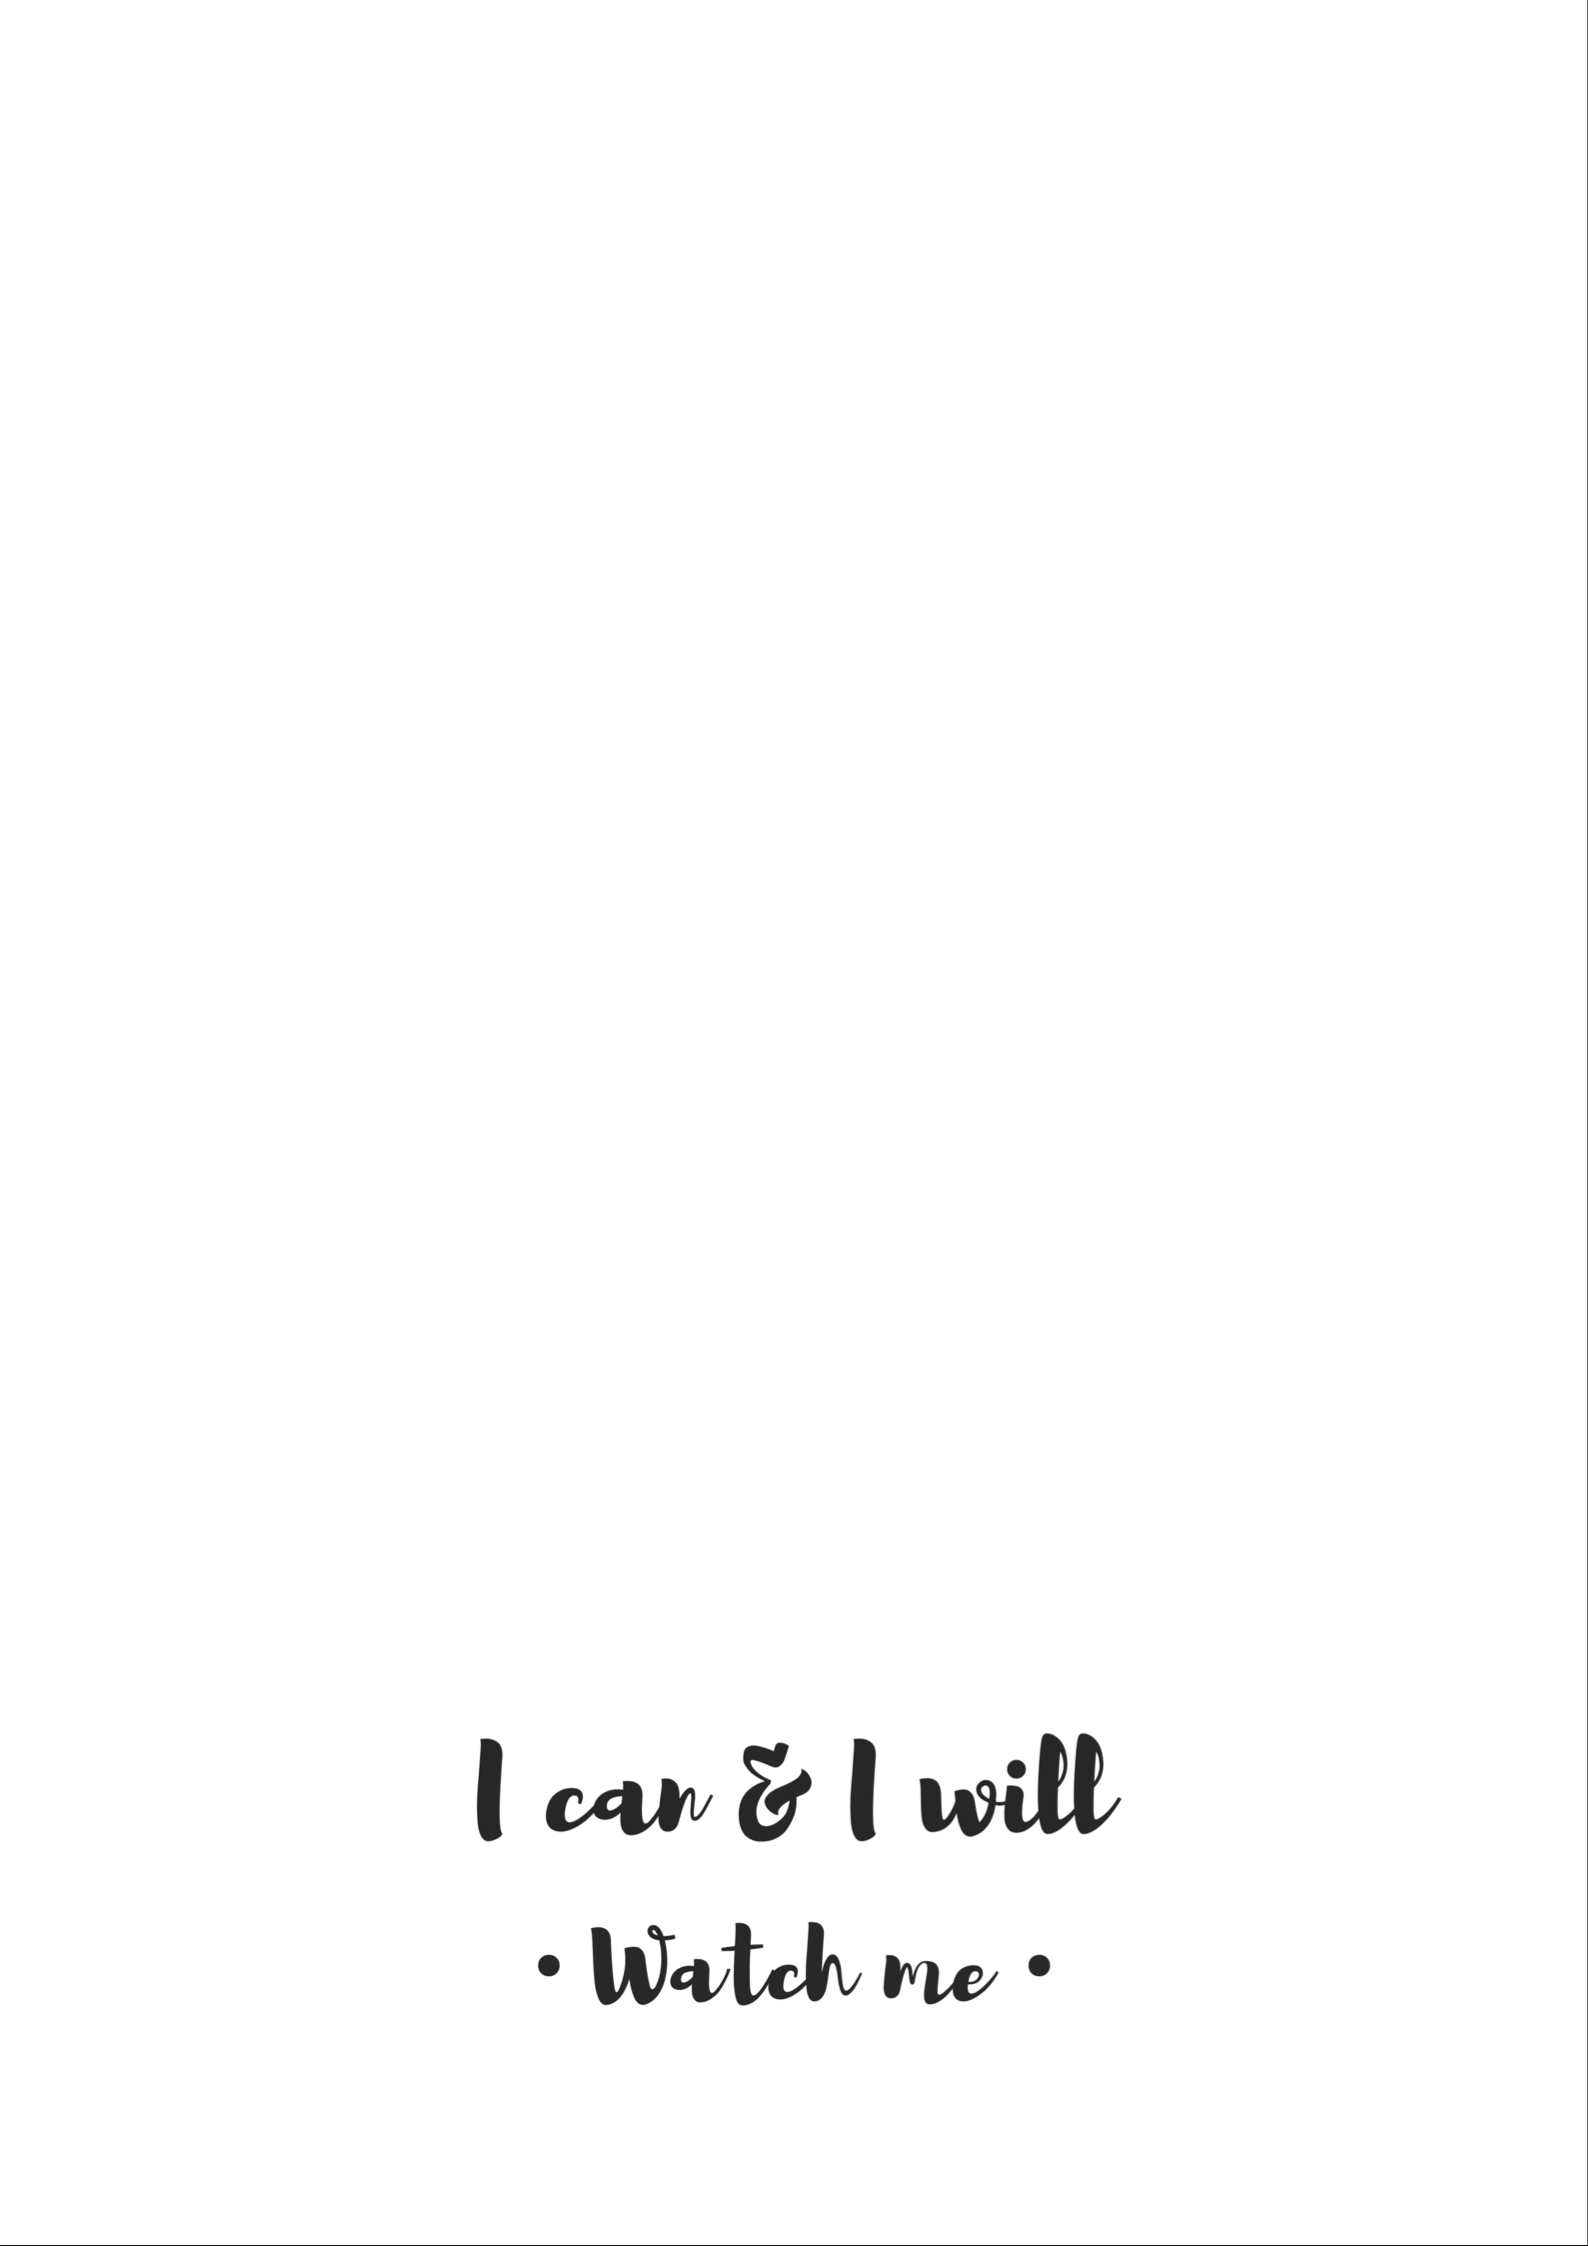 I Can & I will. Watch me. Simple, clean, minimalist, black